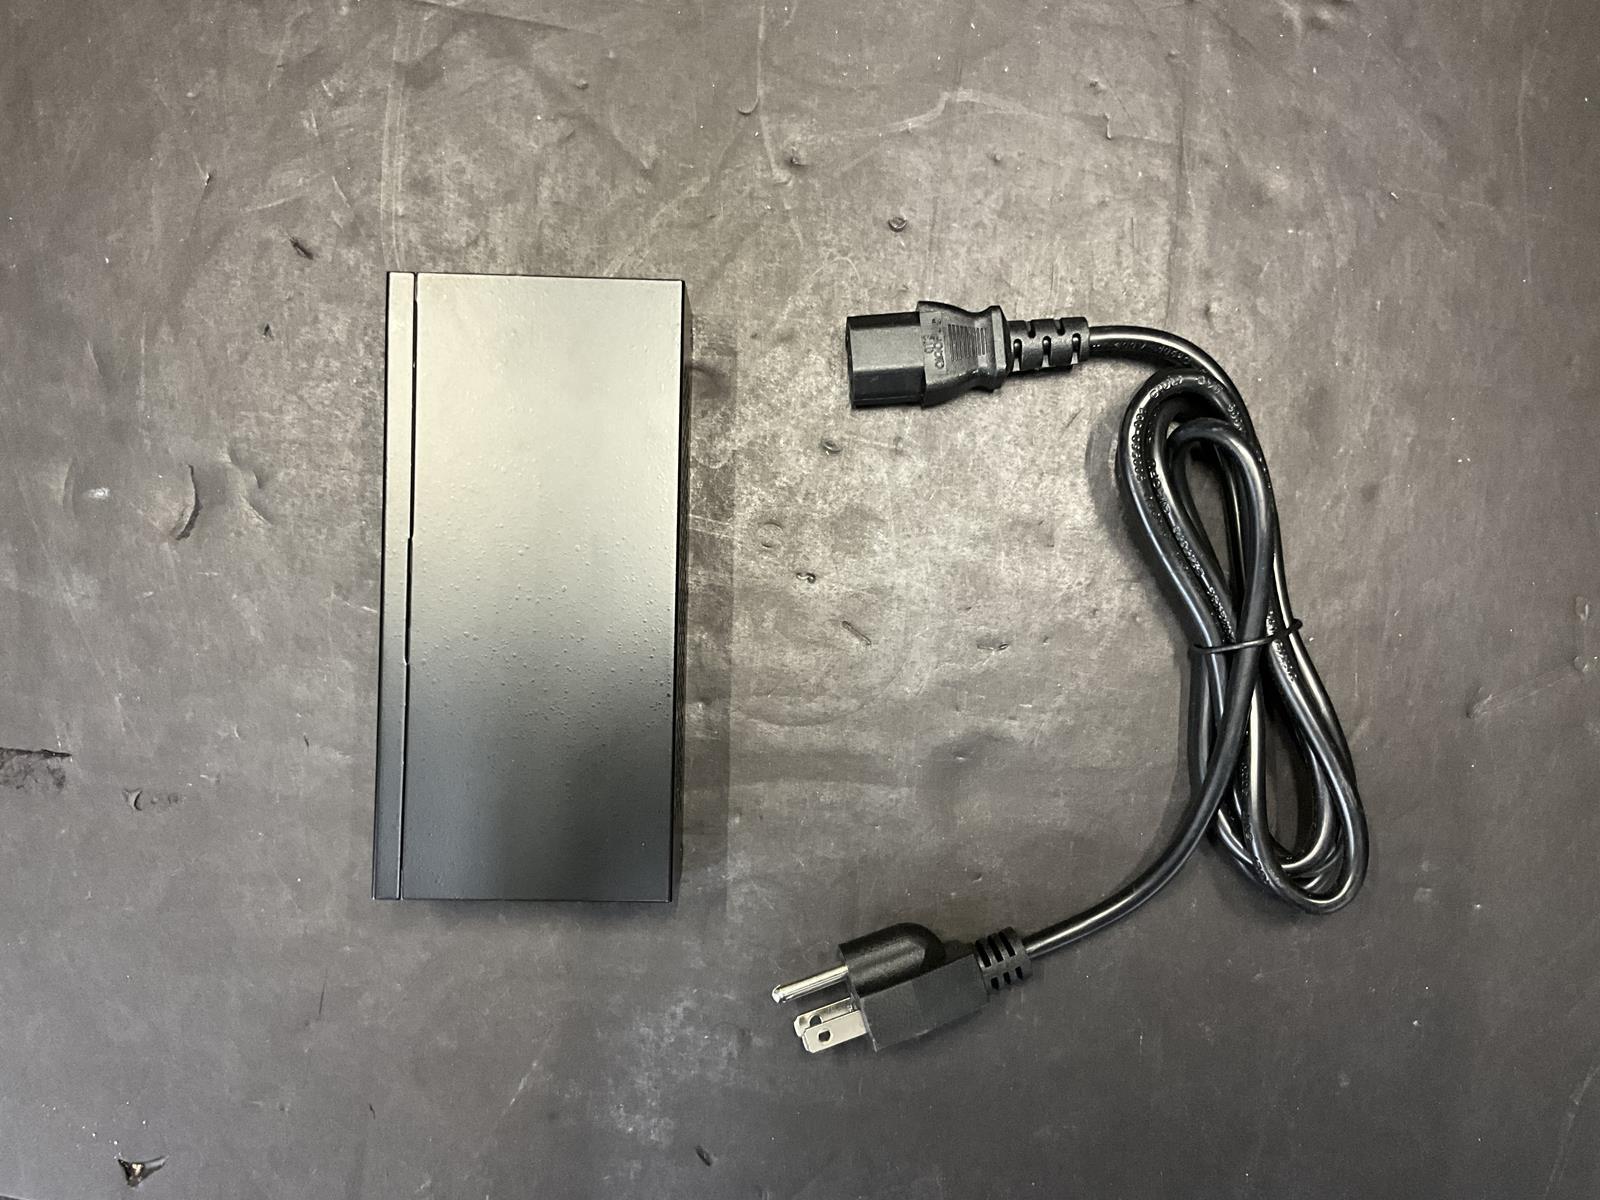 Gigabit PoE Plus Injector Rosewill RNWA-POE-1000 with Power Cord